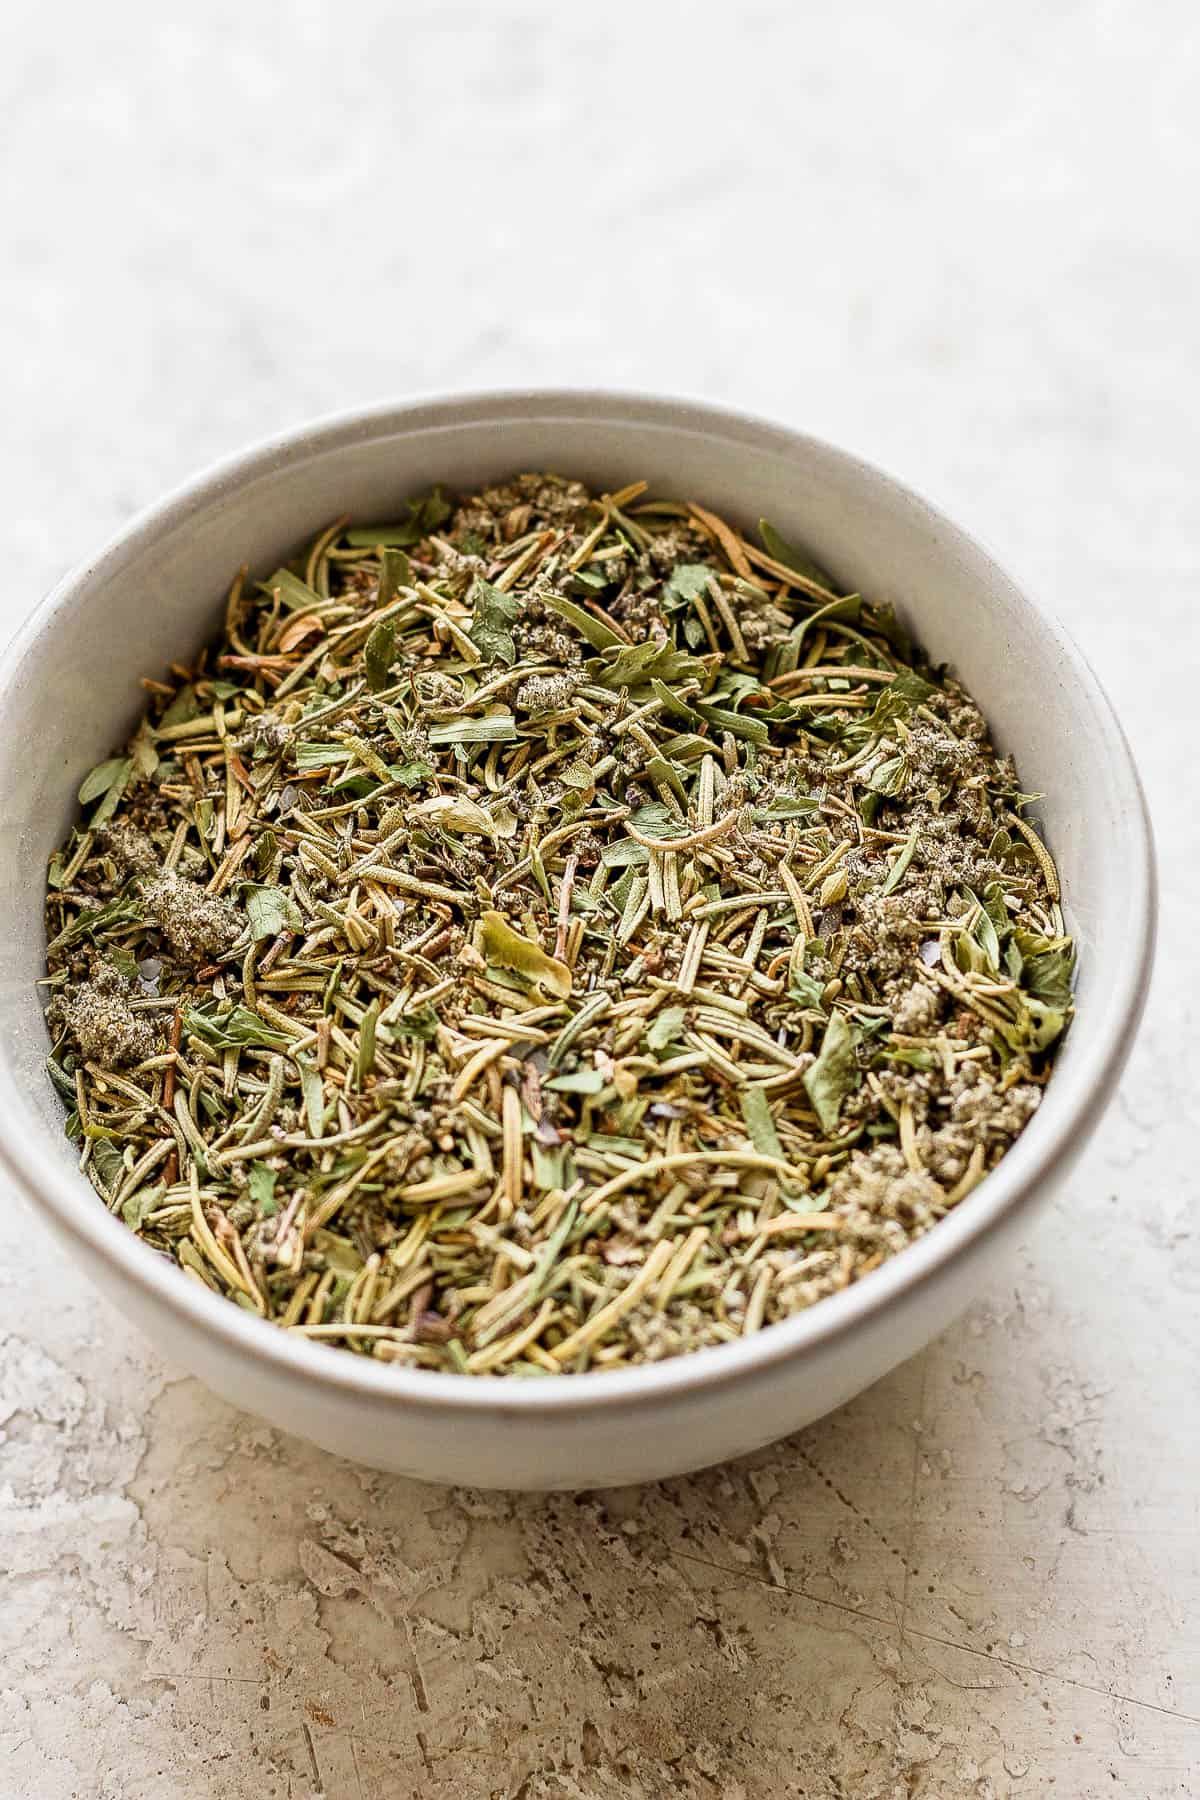 The dried herbs and spices mixed together in a small white bowl.